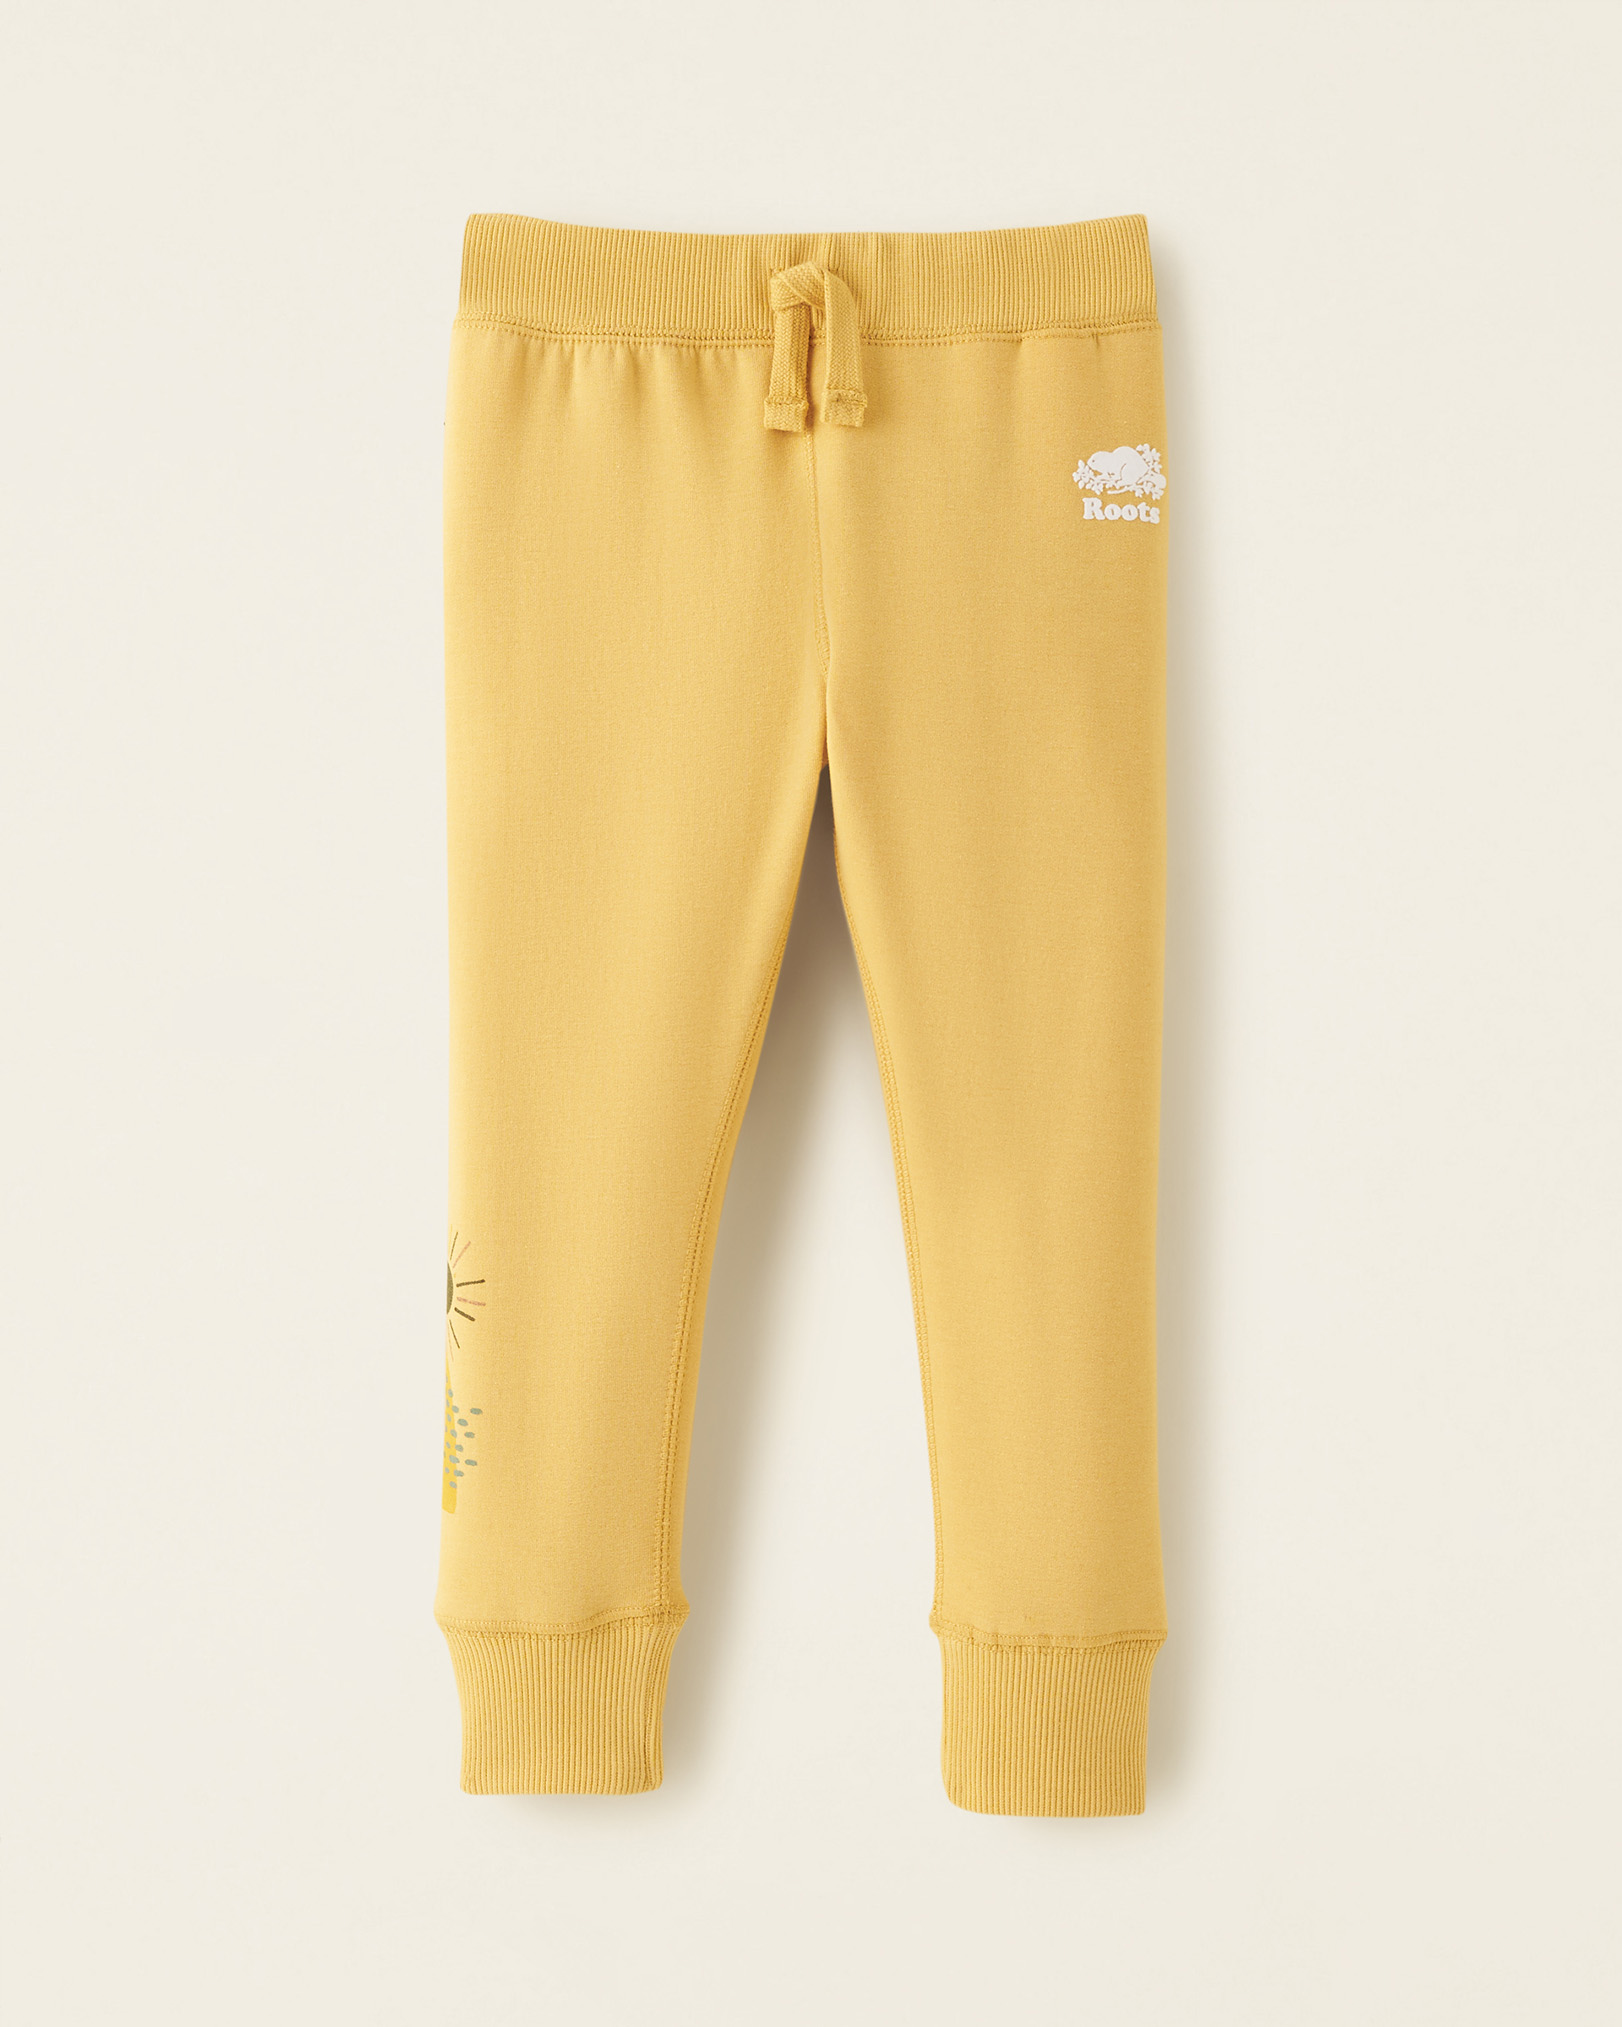 Roots Toddler Girl's Cozy Graphic Slim Sweatpant in Wheat Yellow